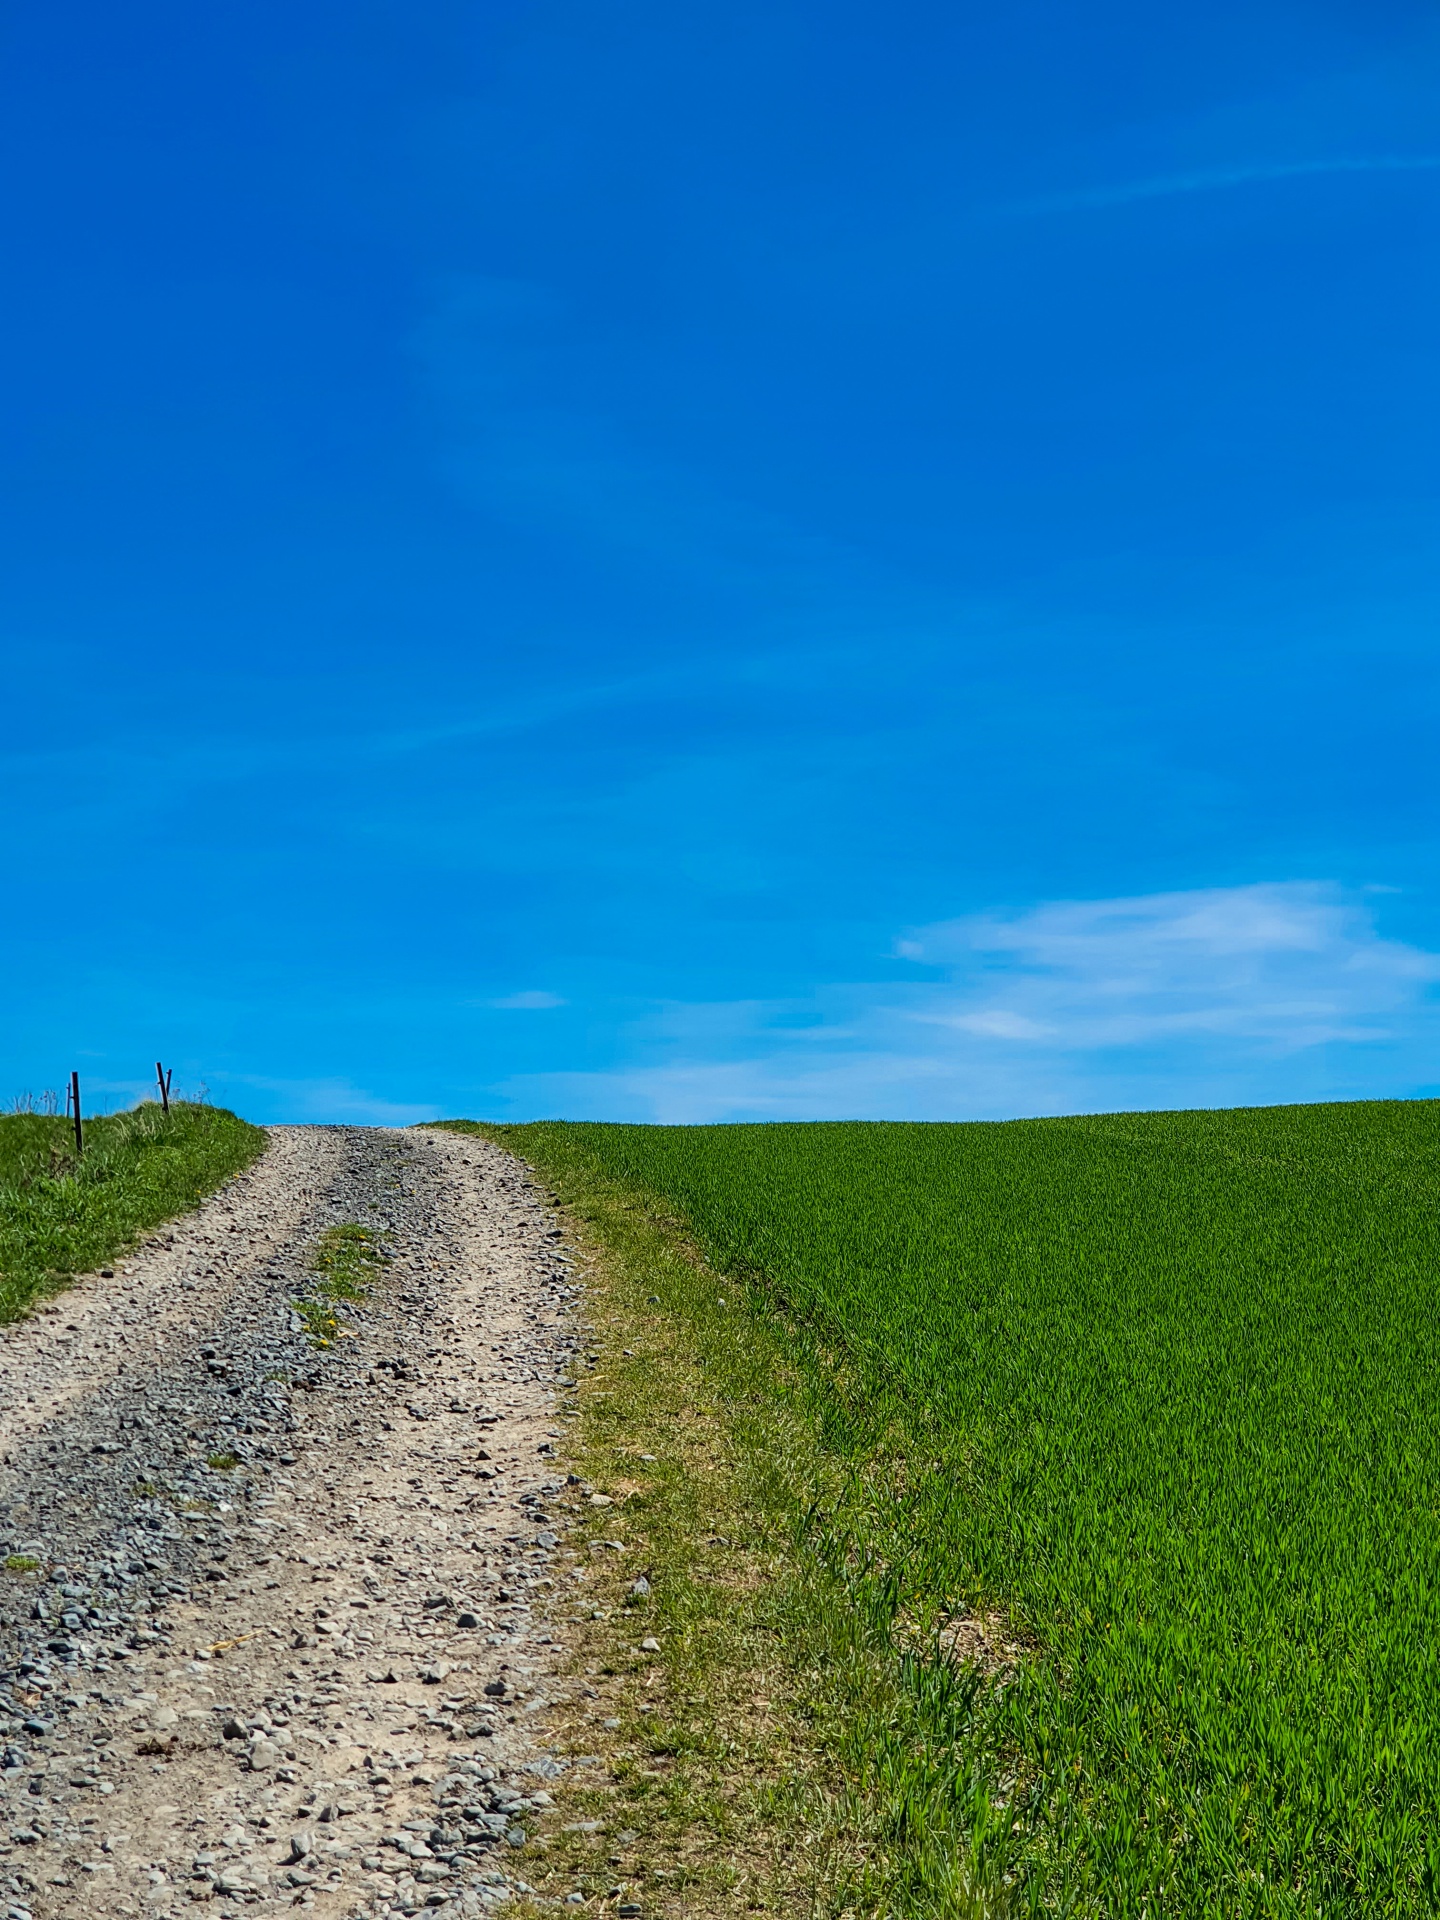 Dirt path, green grass and blue sky background